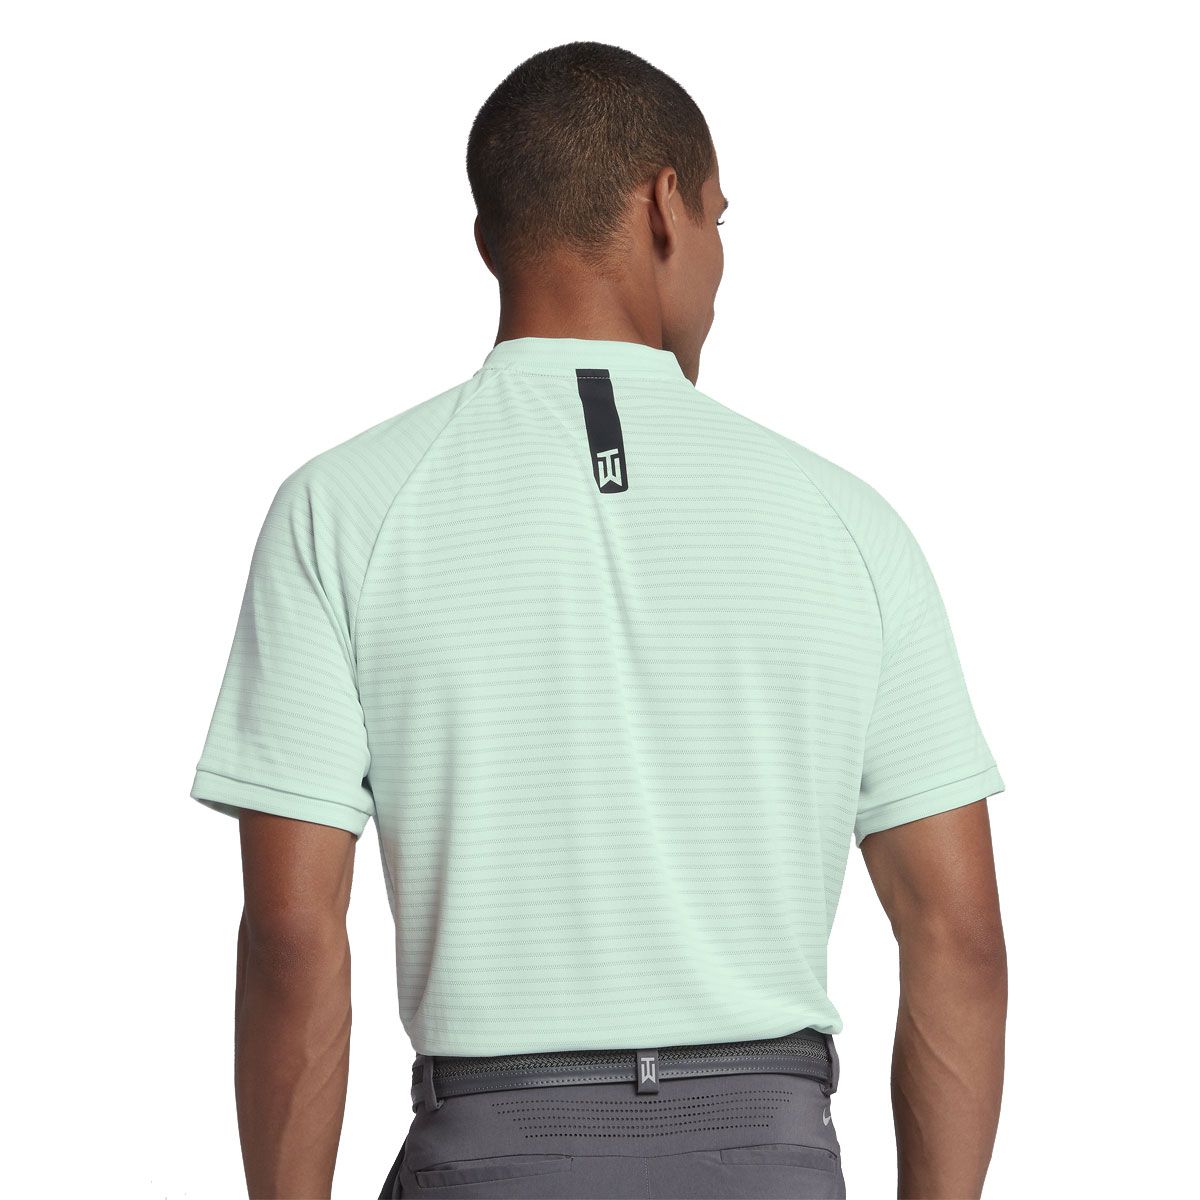 Nike TW Tiger Woods Zonal Cooling Polo 932175